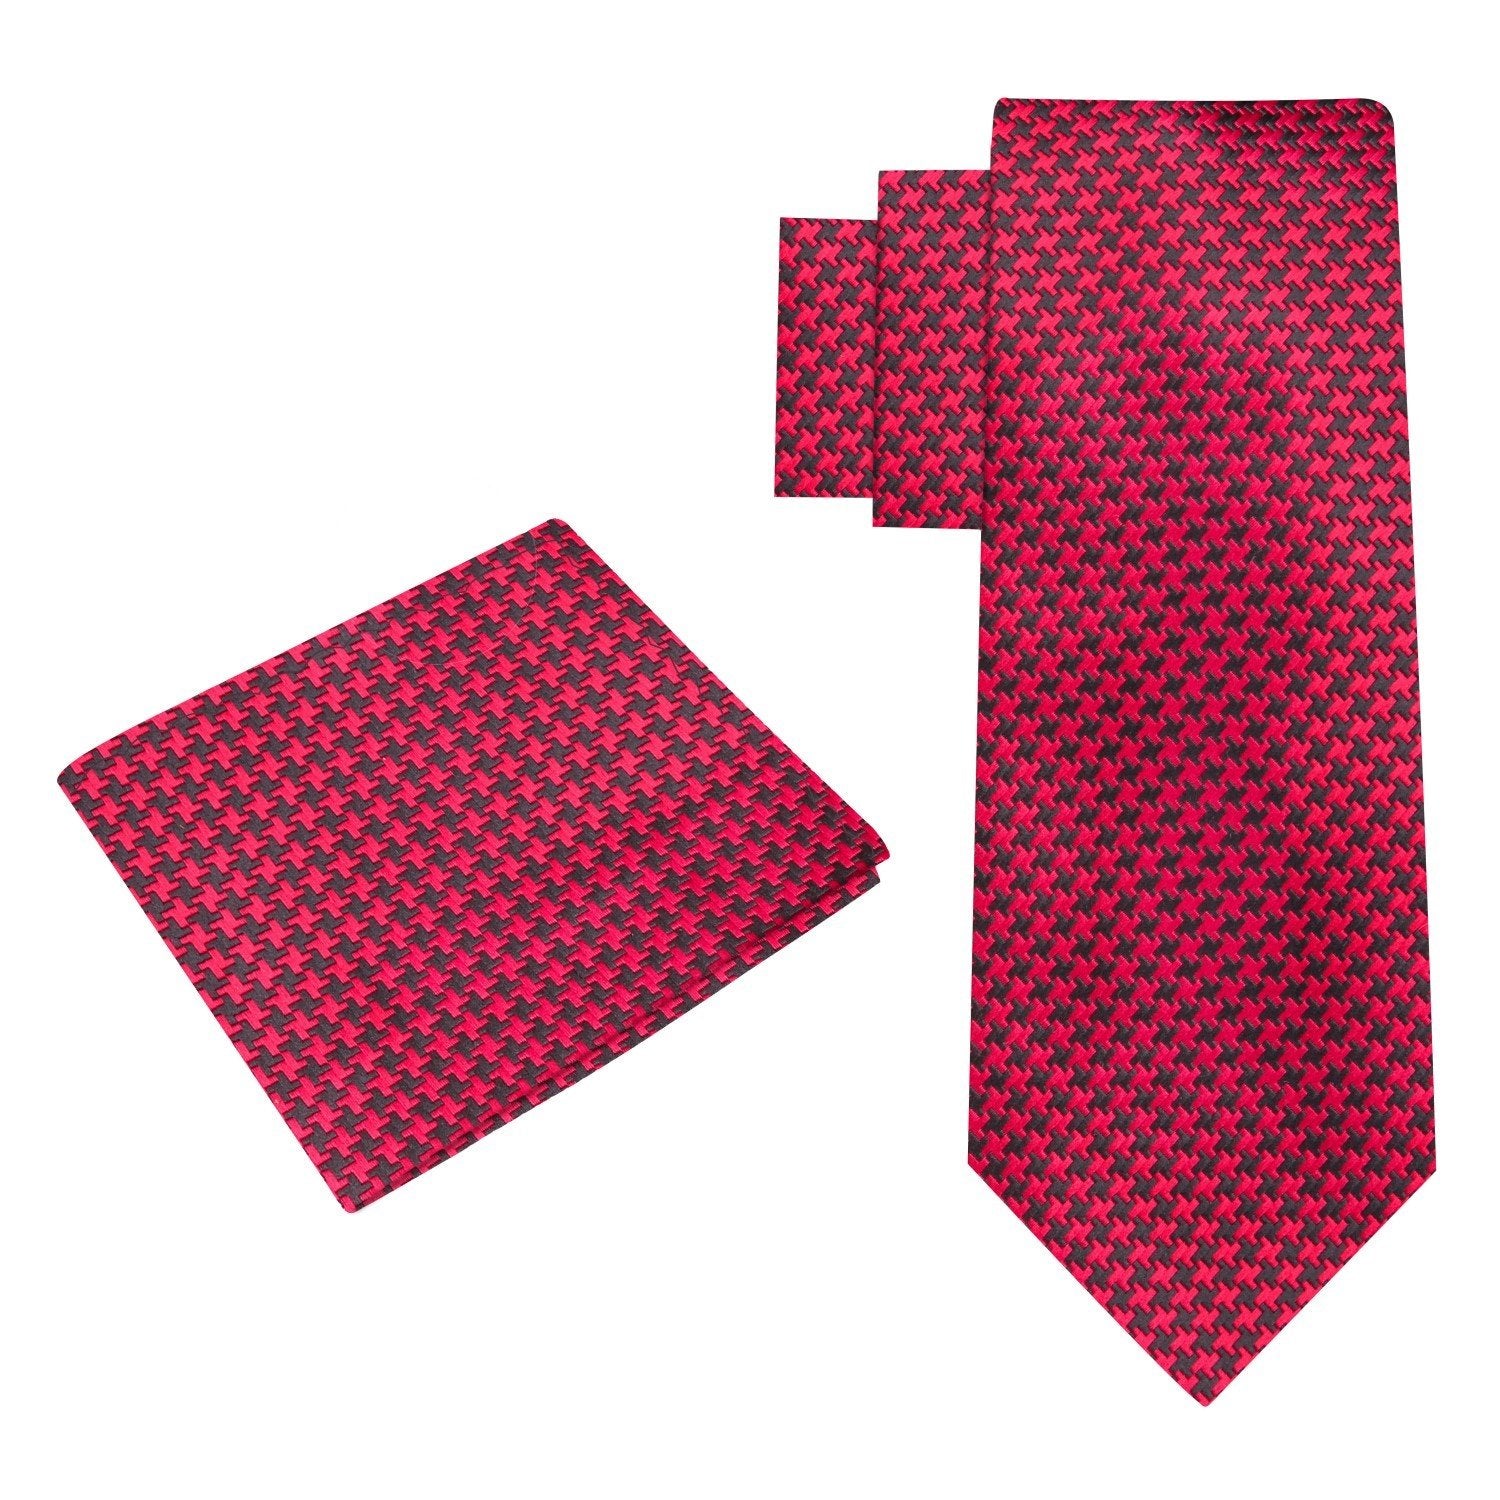 Alt View: Red and Black Hounds Tooth Tie and Pocket Square